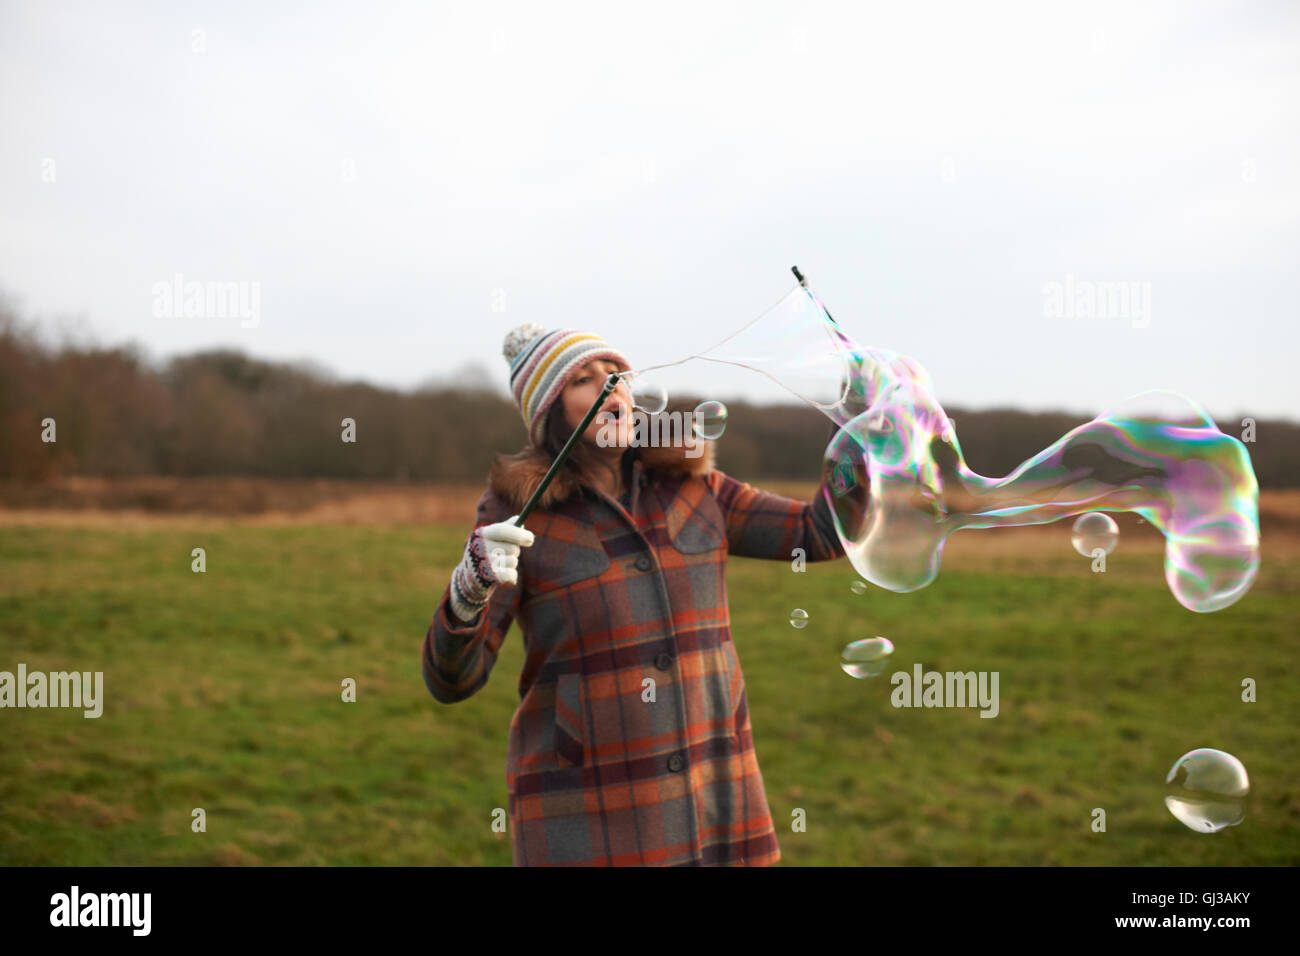 Woman in field using bubble wands to make bubbles Stock Photo